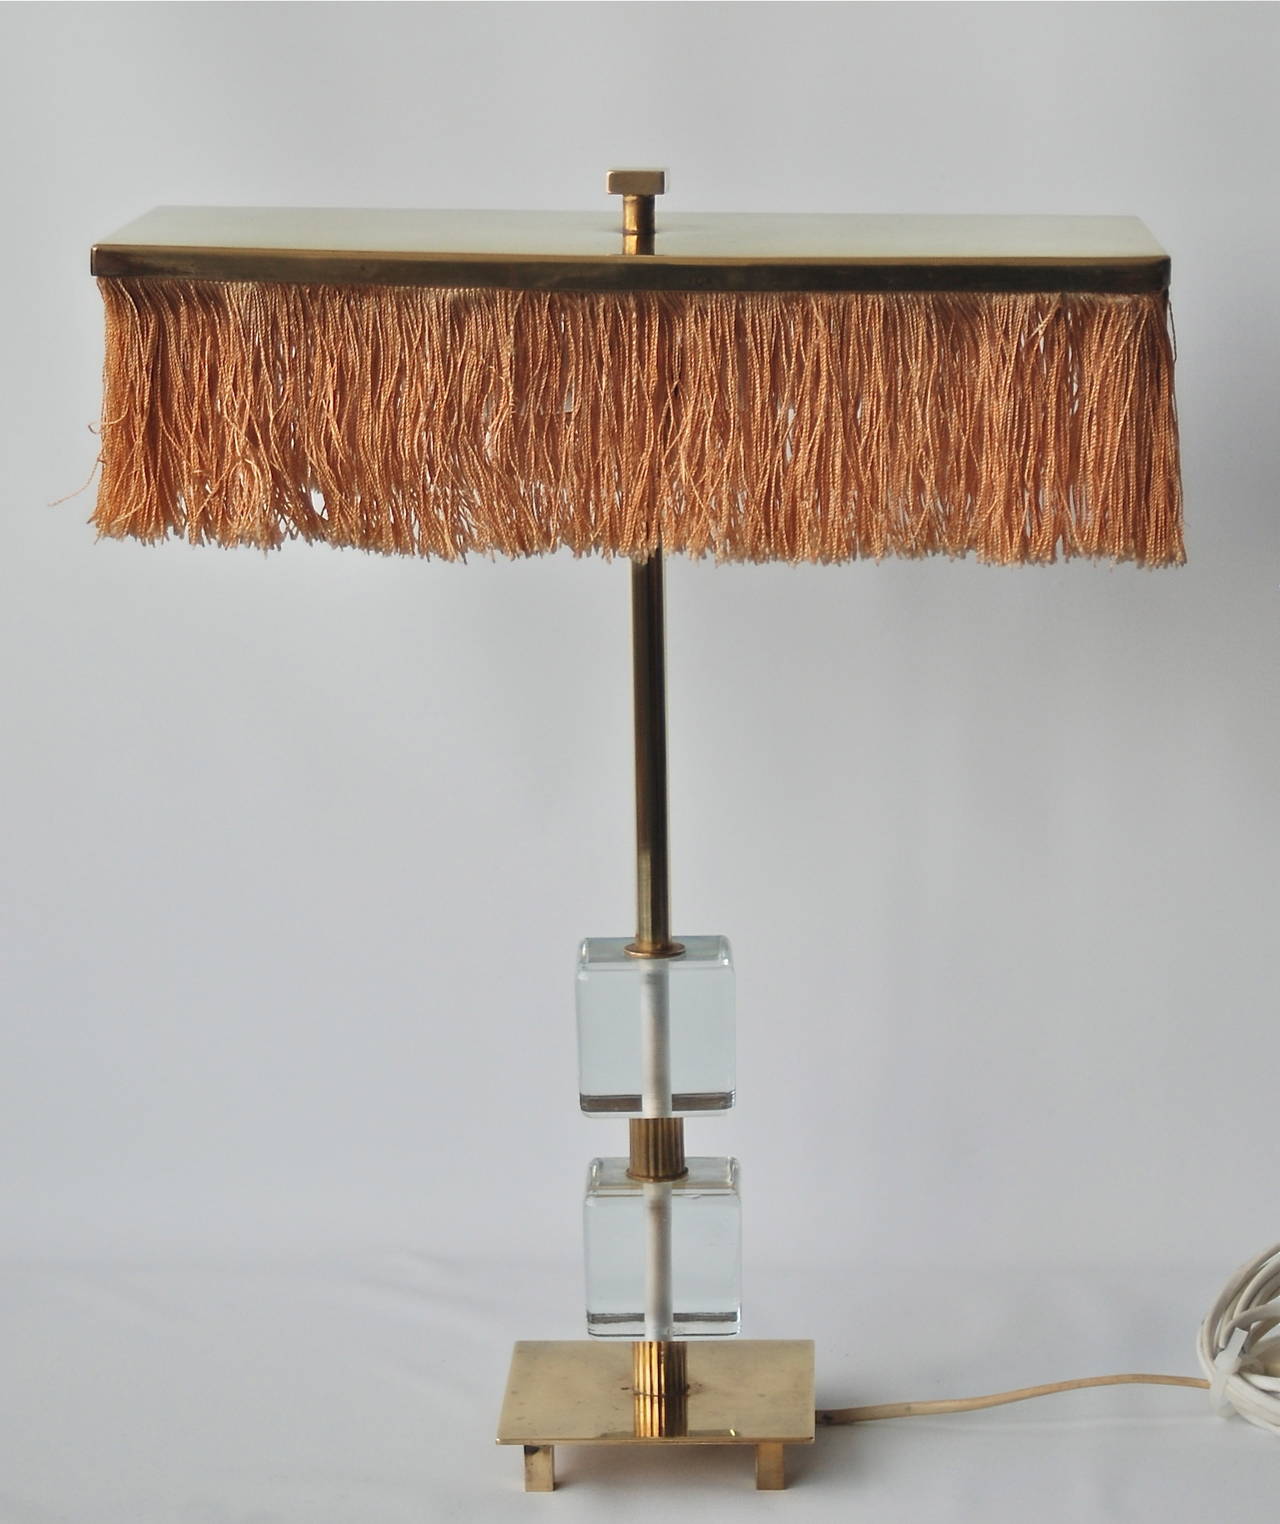 A table lamp made by Malmo Mettalyarufabrik AB, Sweden, circa 1960.
Clear glass and brass. Original shade. Measures: H 17"; base 4.5" x 4.5"; cubes 2.5" x 2.5". The shade 13.75" x 6" x 4" H.
 Existing